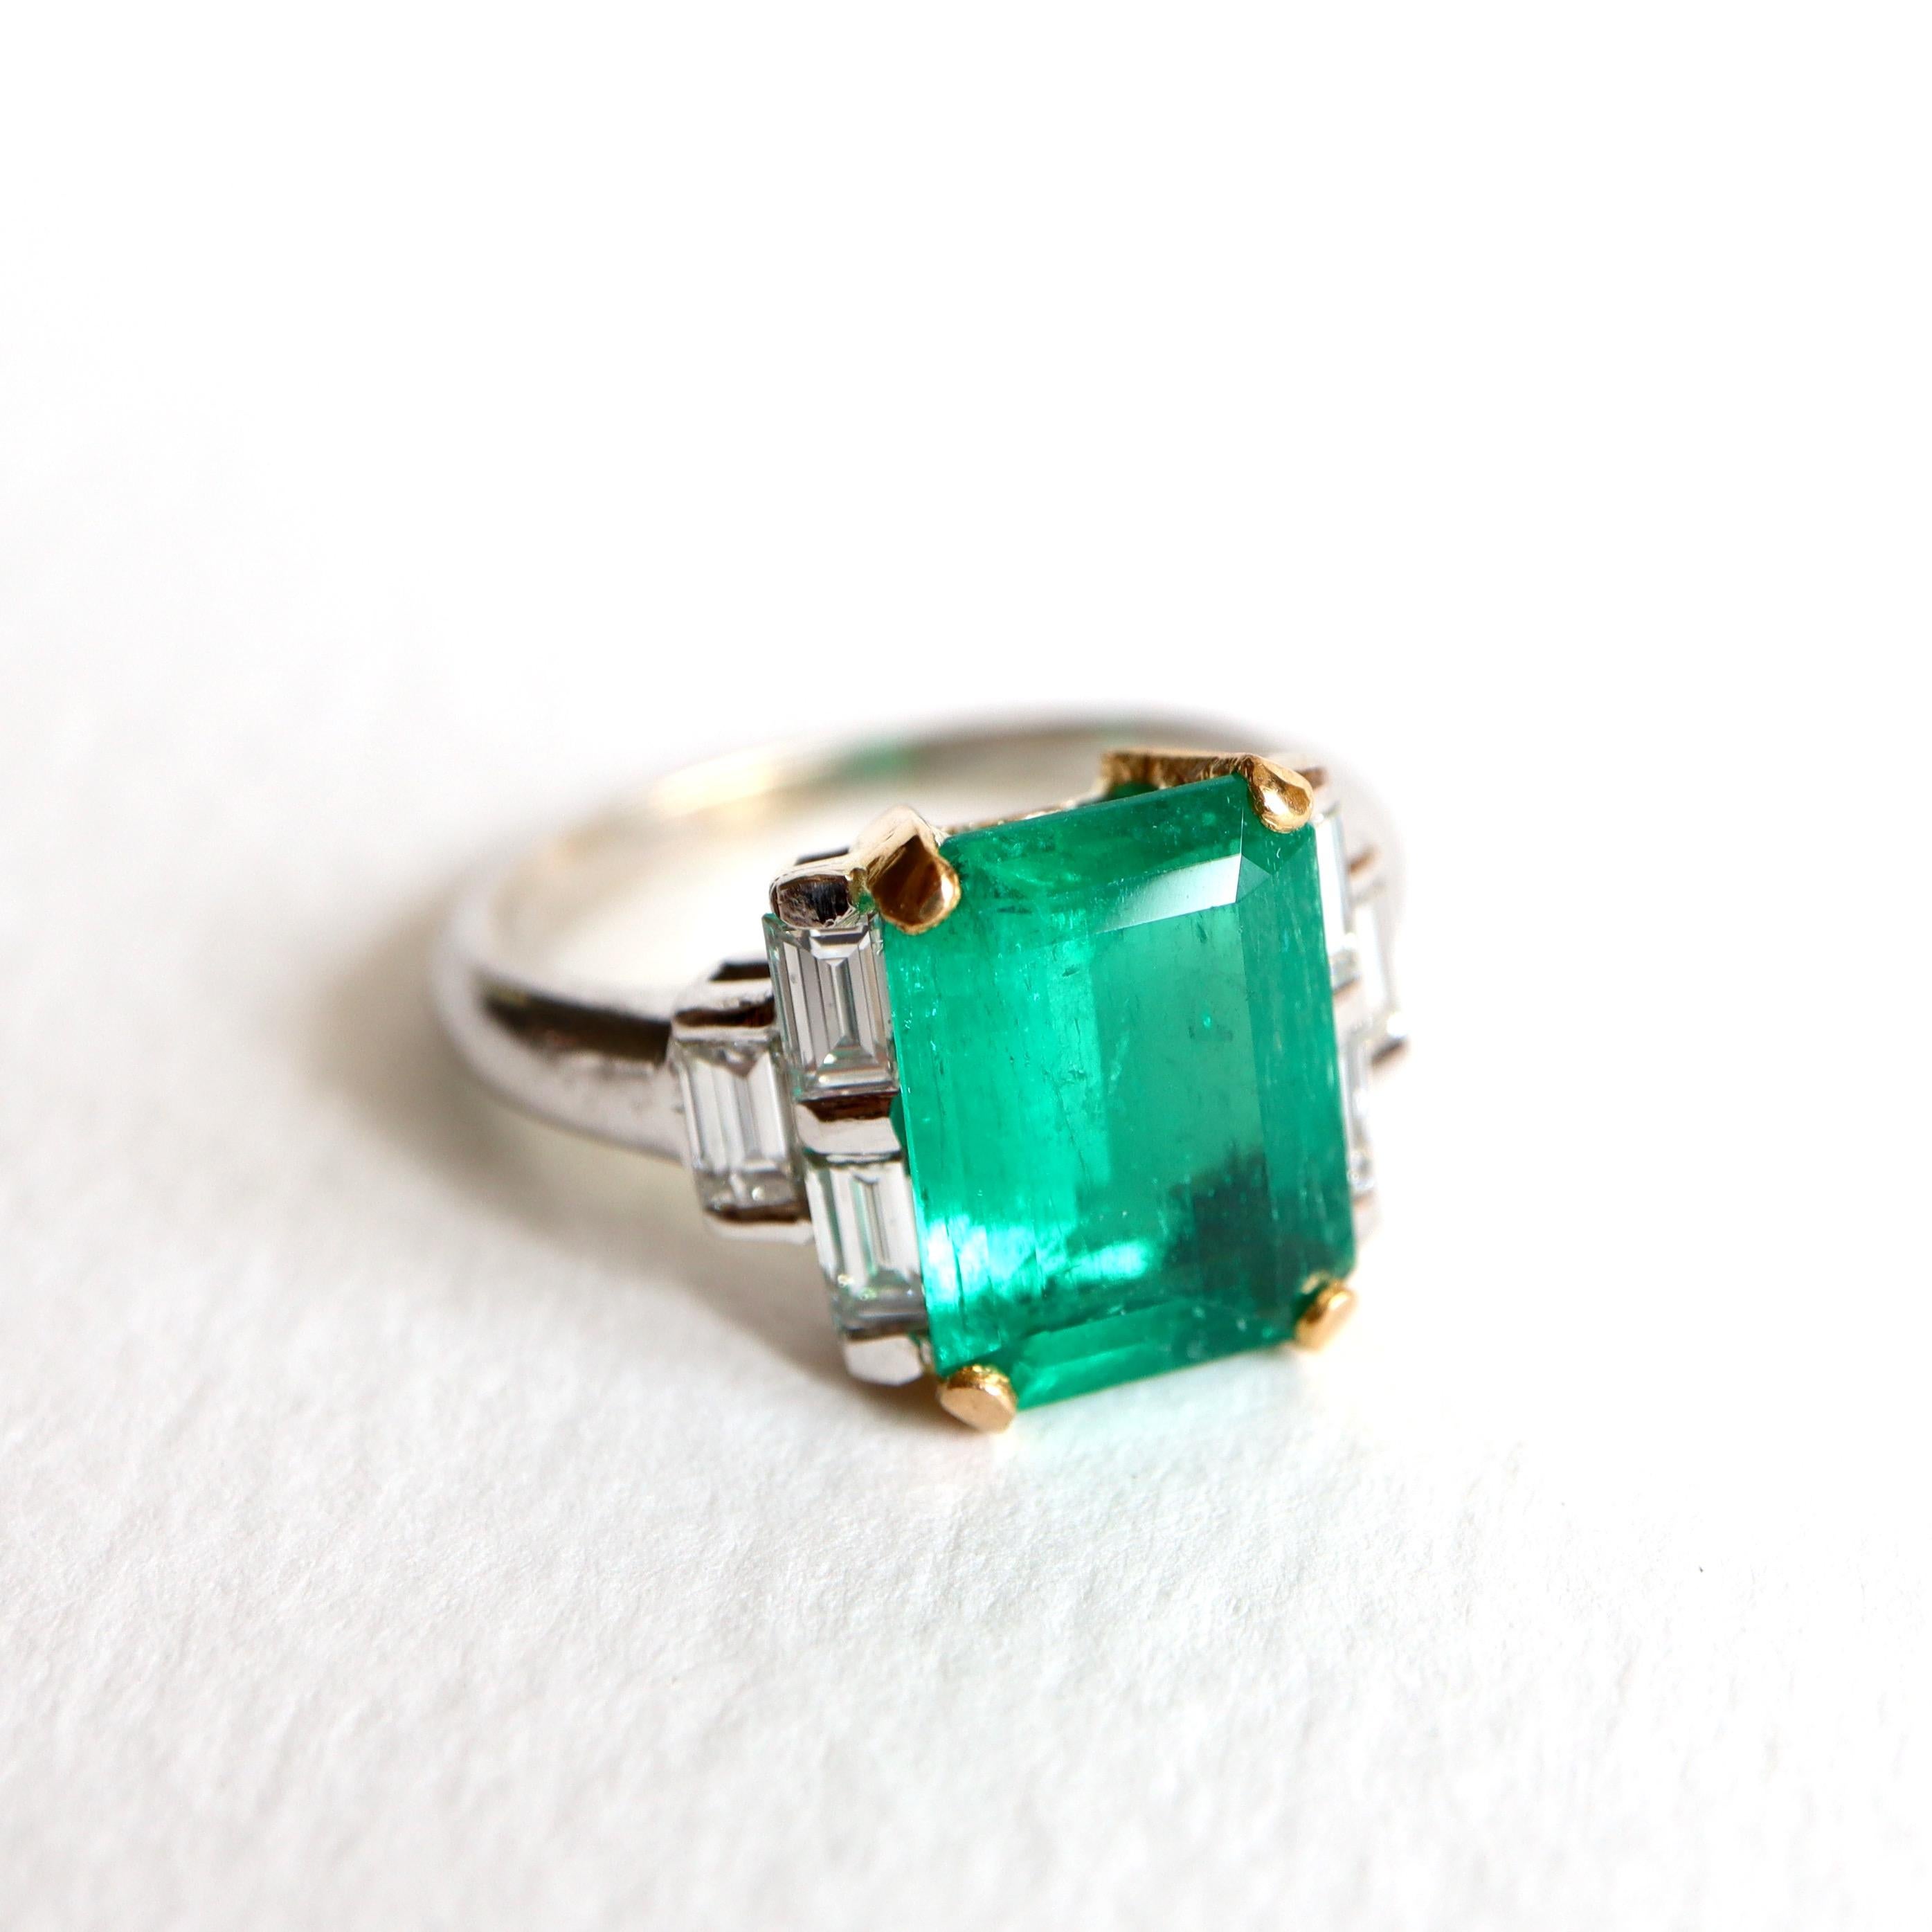 Emerald Ring 3.71 Carat in 18K White and Yellow Gold, Diamonds 1